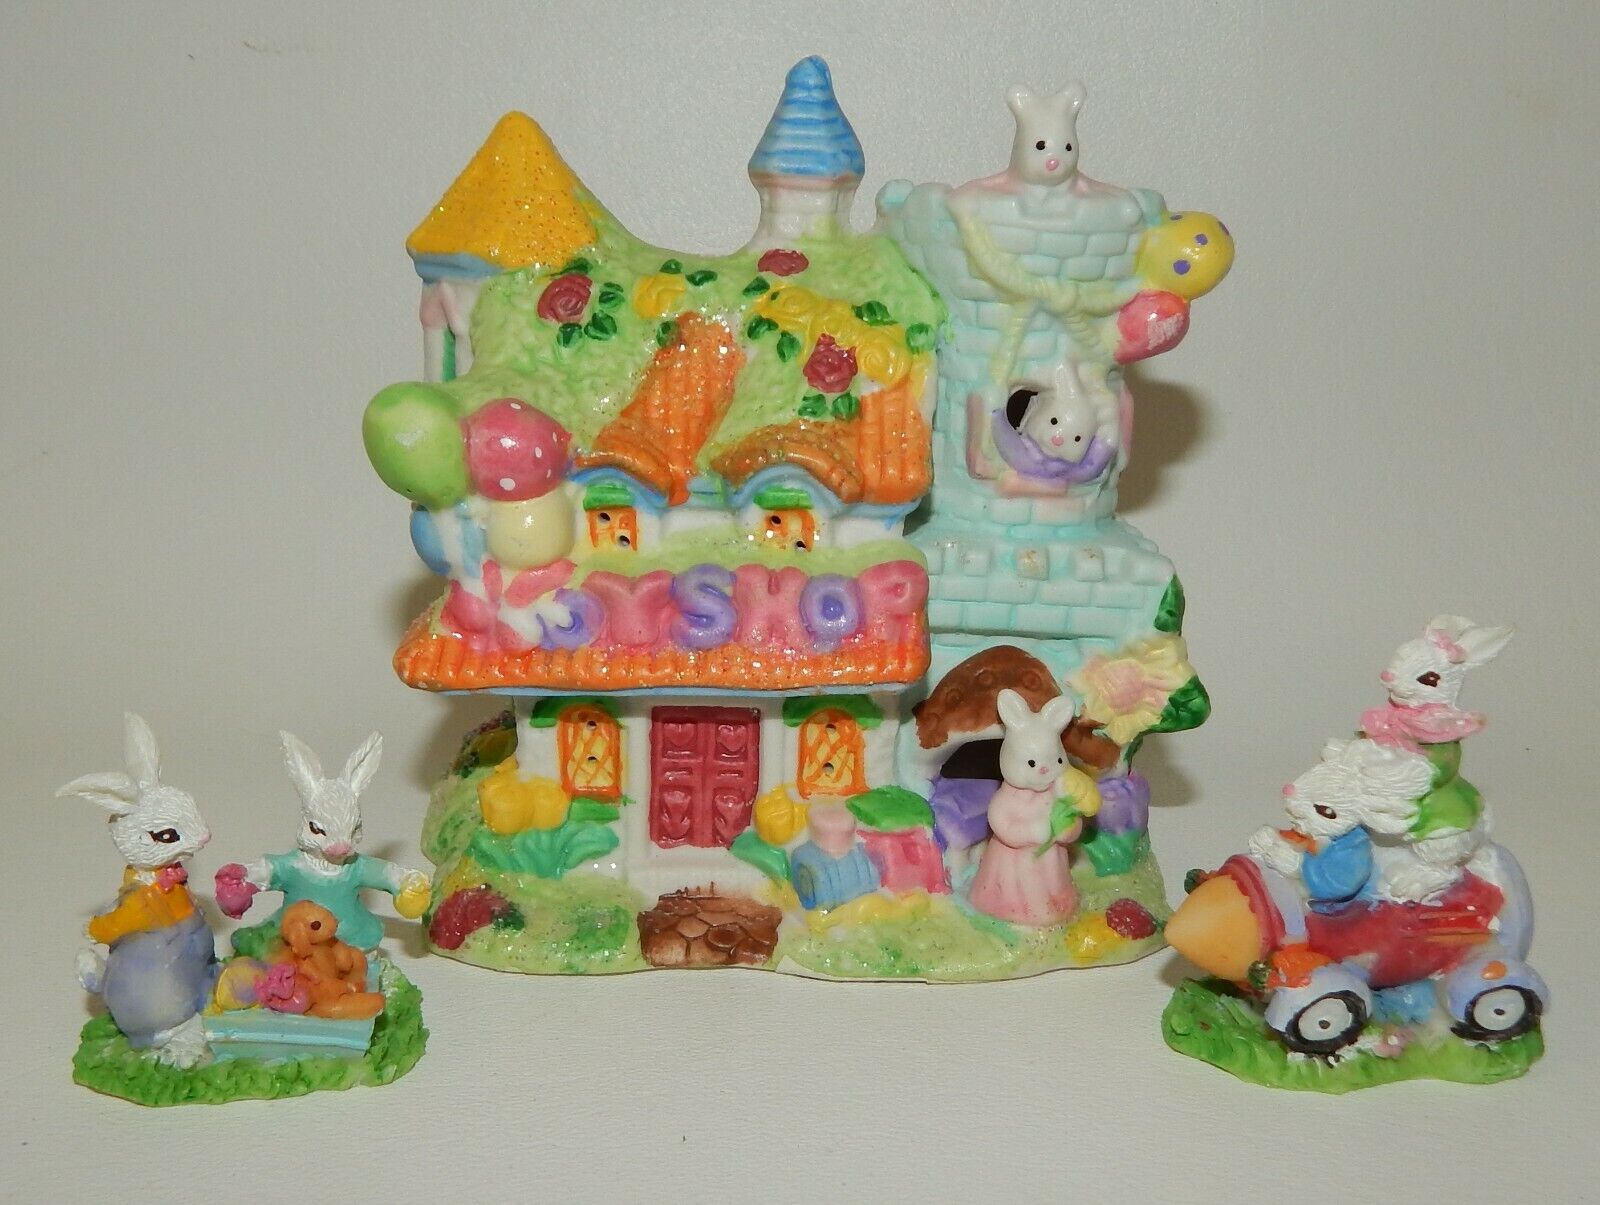 2004 Hoppy Hollow Easter Village Toy Shop with Bunnies Playing with Toys